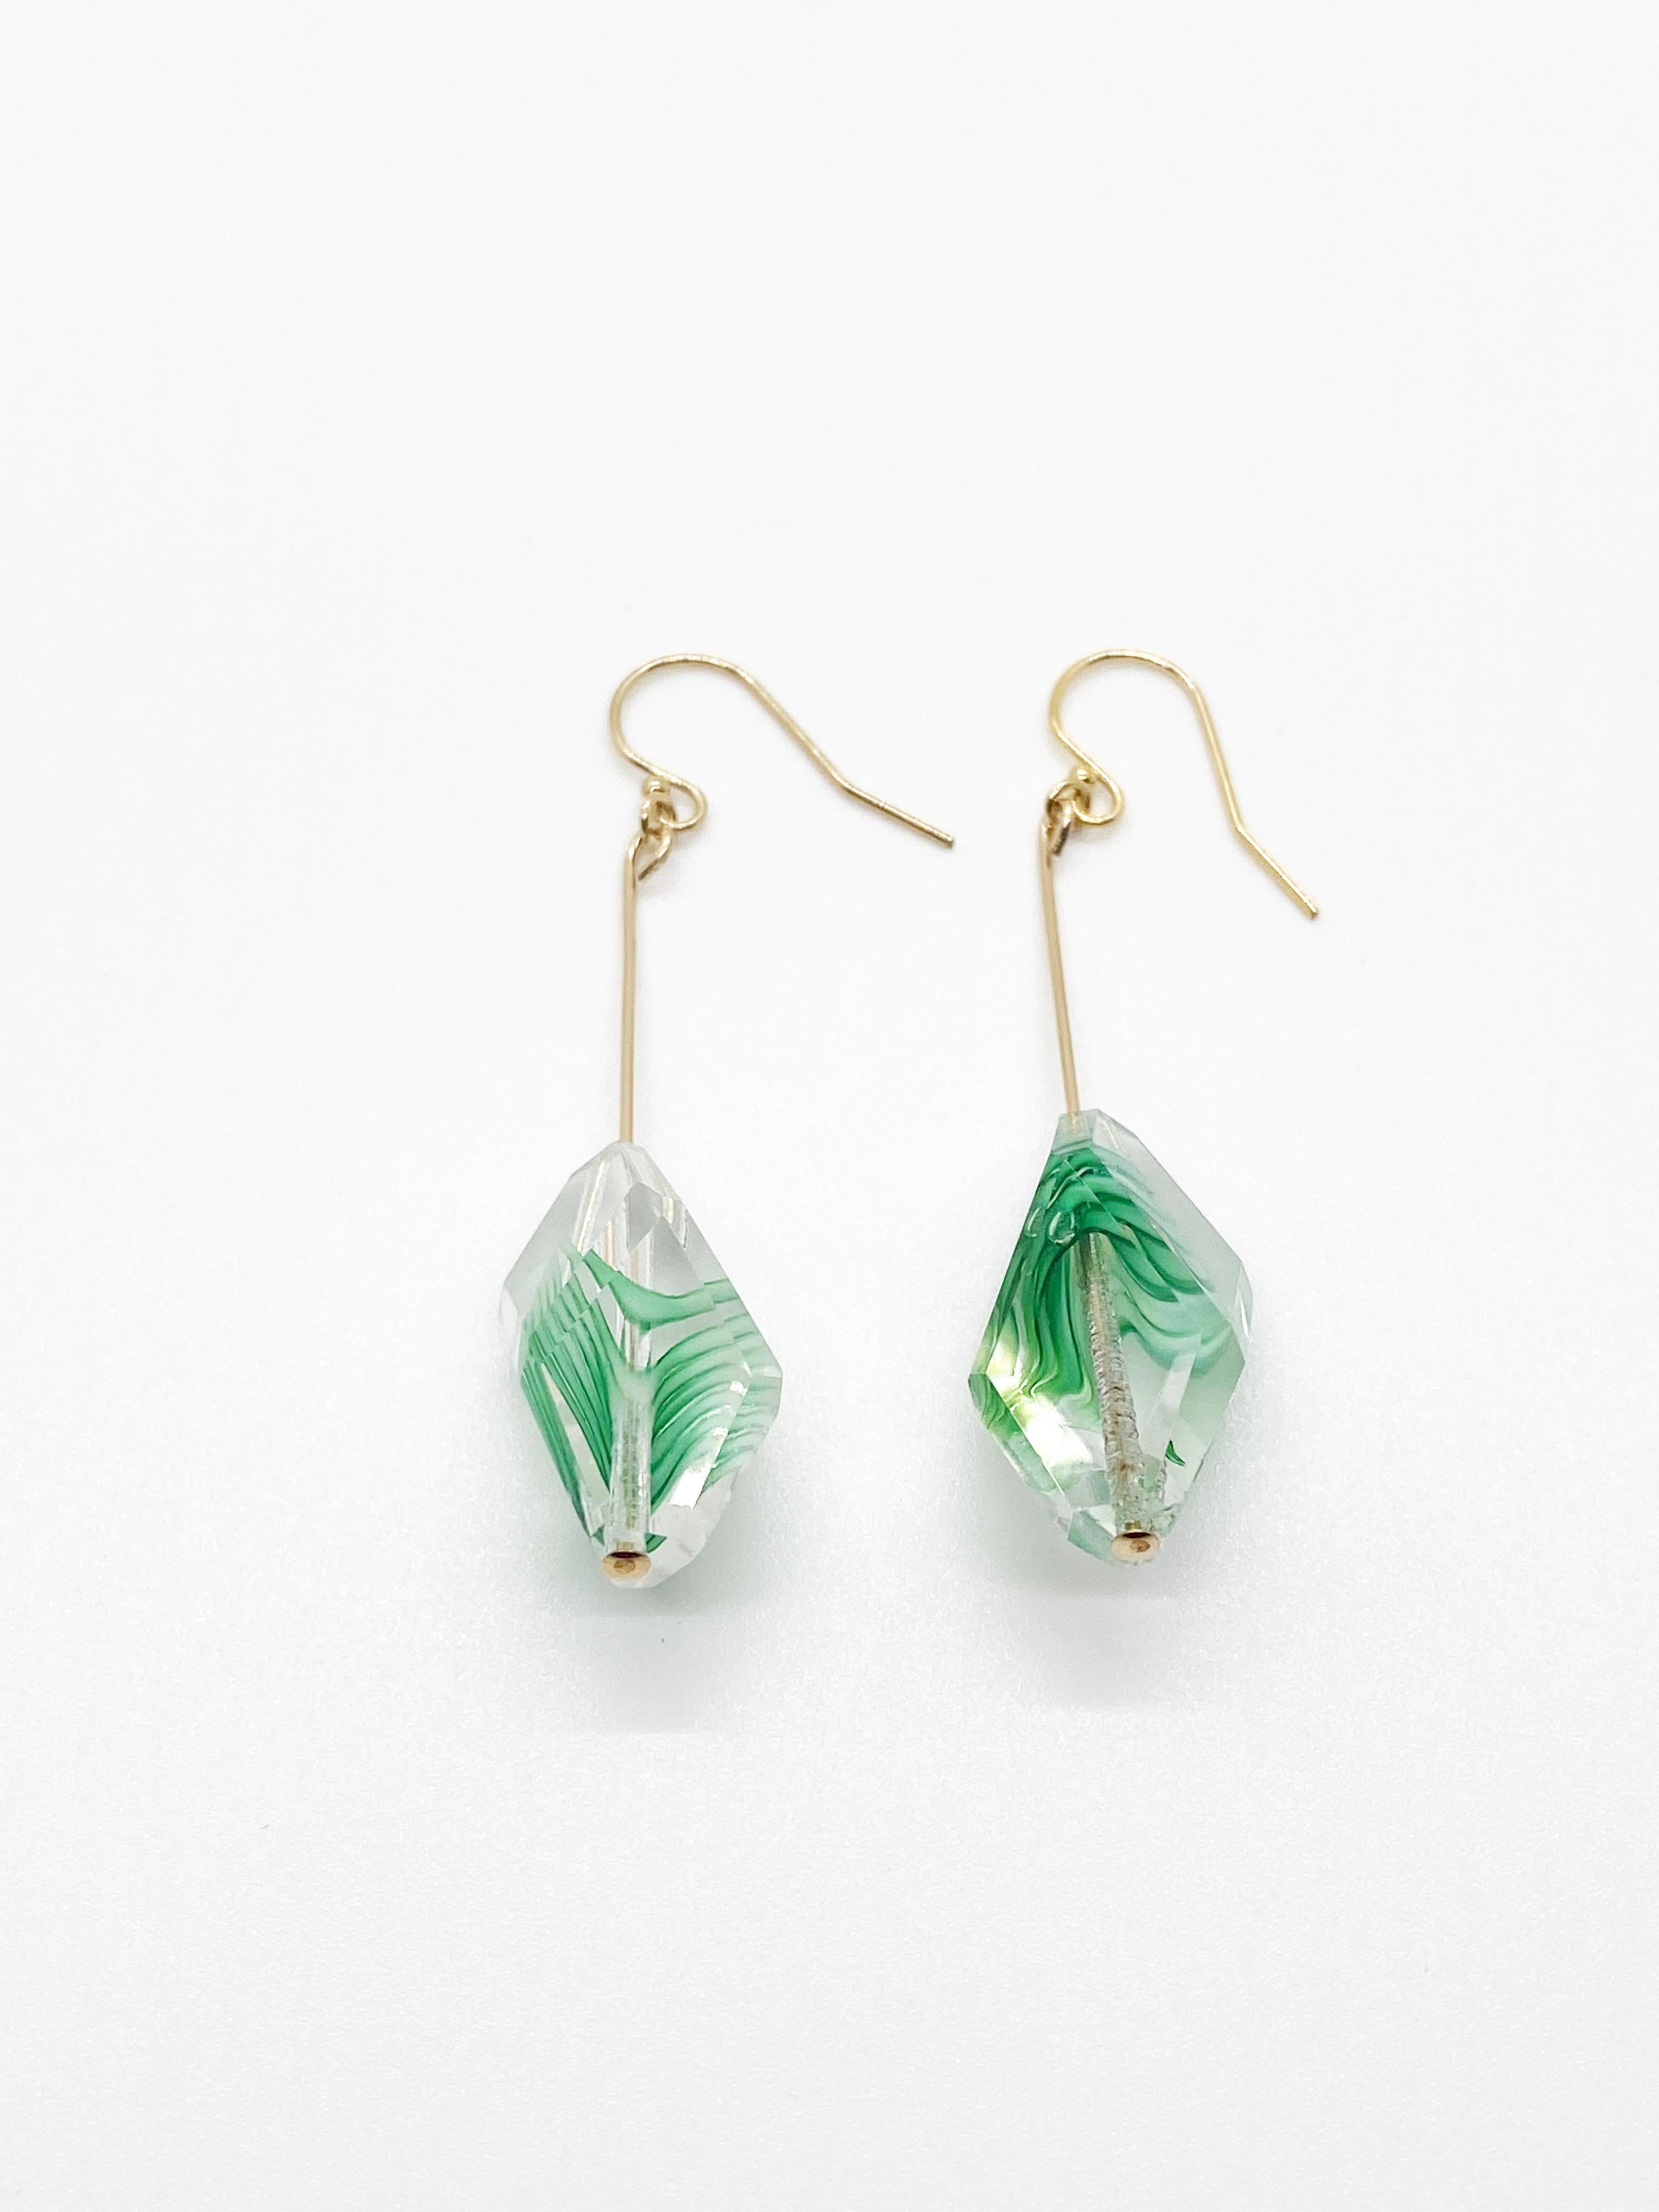 Rare and breathtakingly beautiful. French antique crystal glass beads, Circa 1910s simply dangles on 14K gold filled ear wires. The only pair that is available in green. 

The crystals measures 24mm x 12mm. 